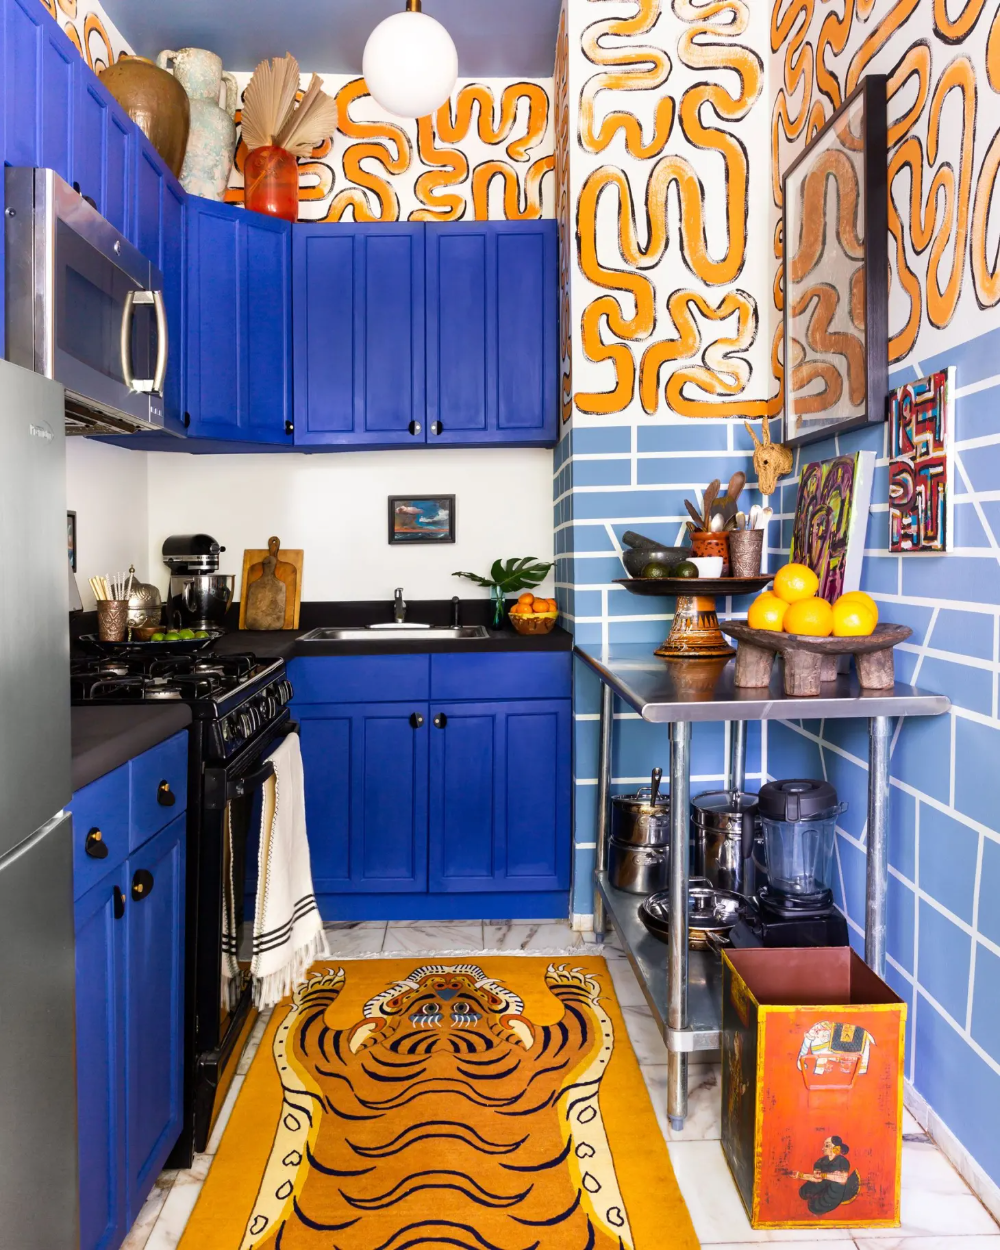 Vibrant Inspiration: Colorful Kitchen Ideas to Brighten up Your Space